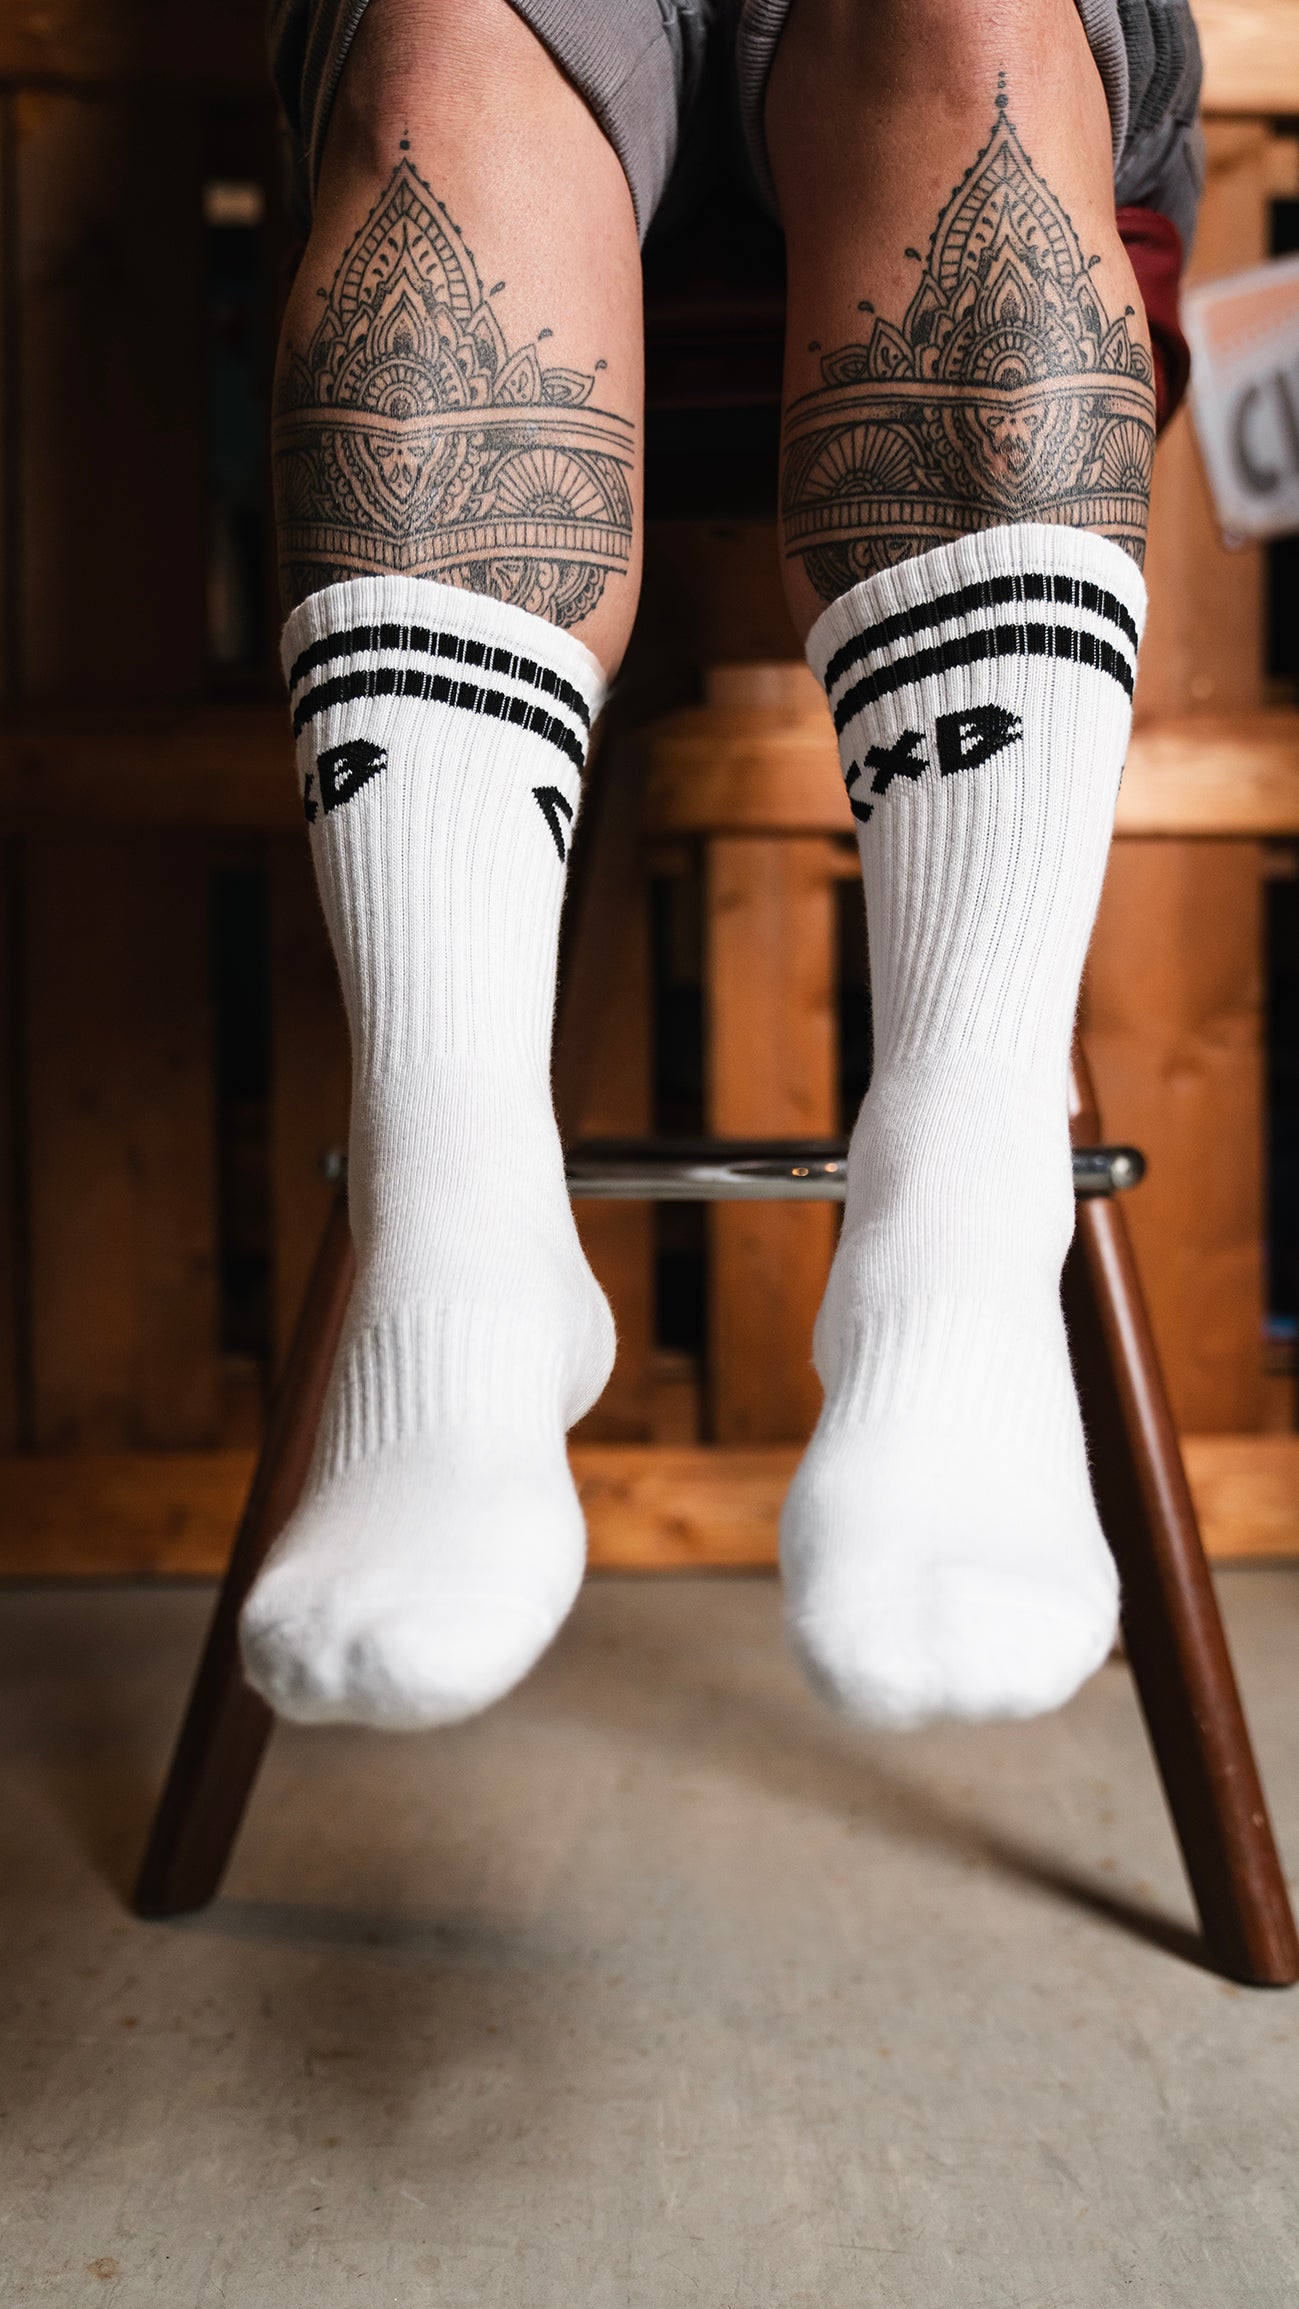 The lady socks - White 2 pieces